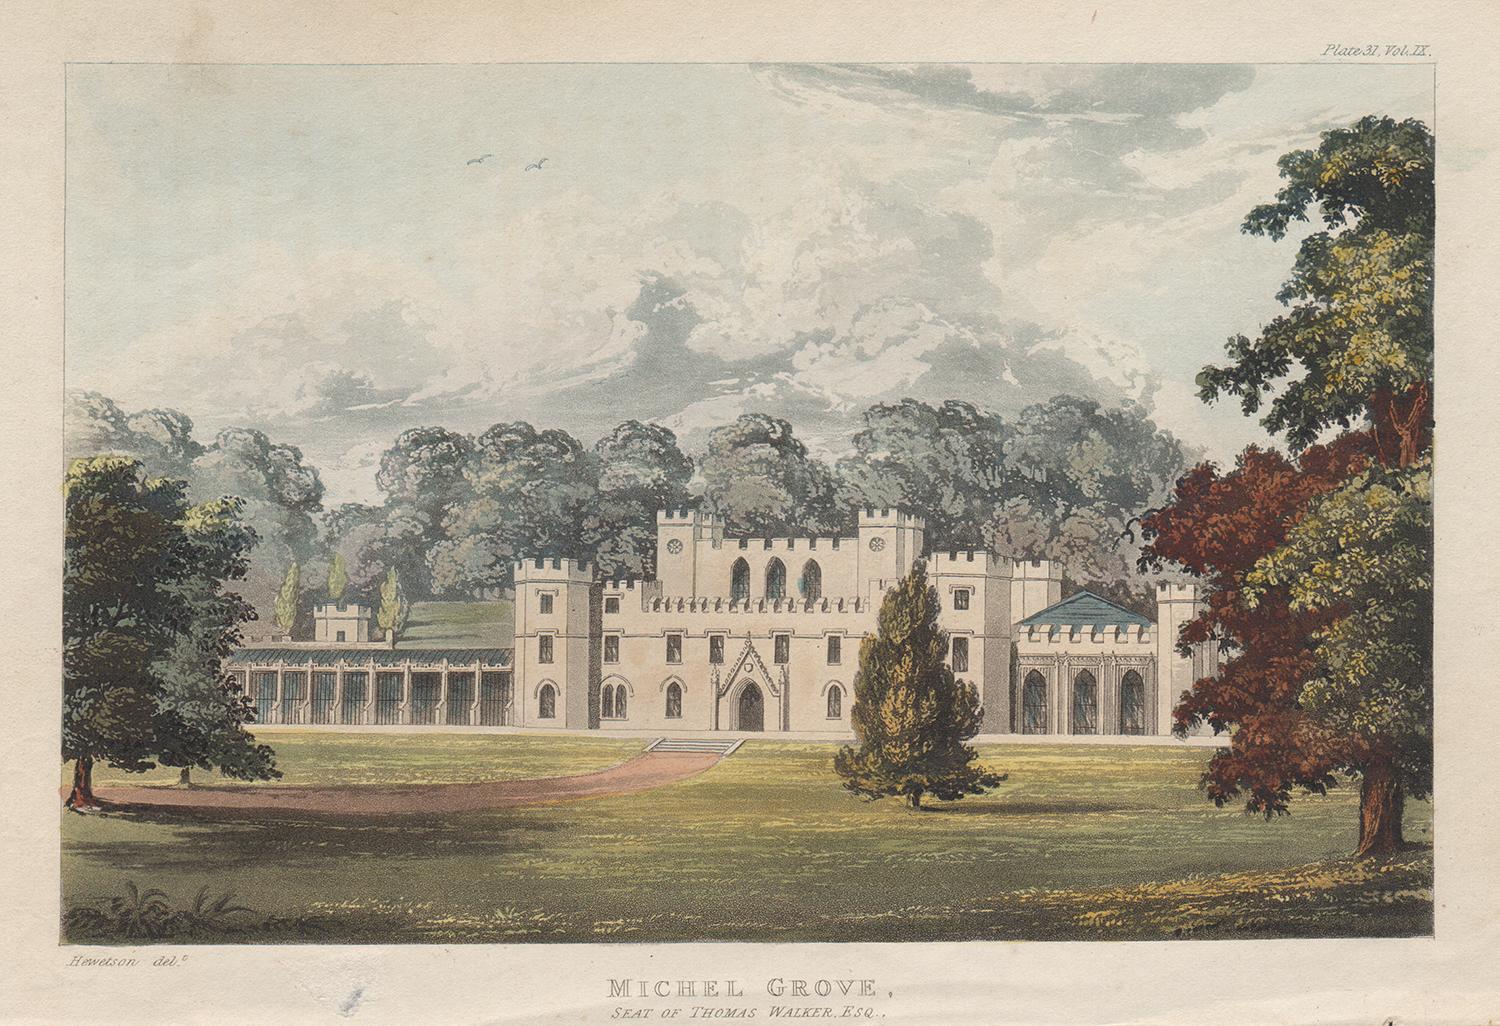 Michel Grove, Sussex English Regency country house colour aquatint, 1818